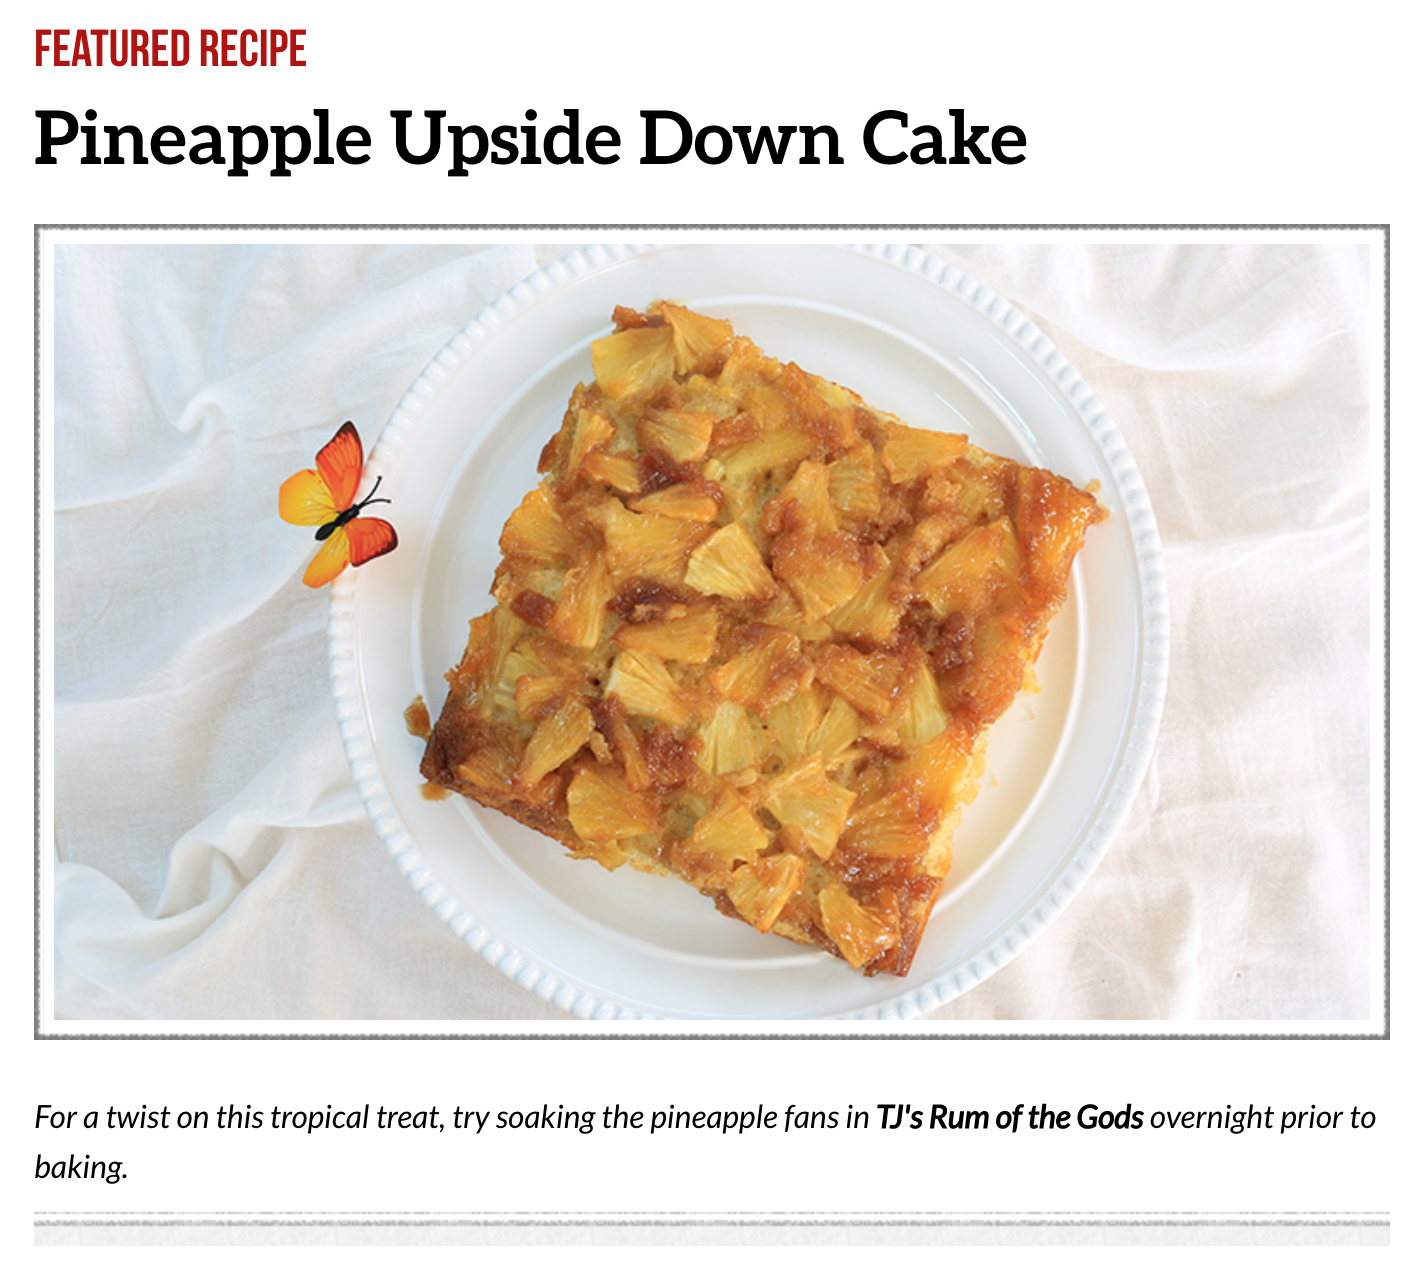 screenshot from the Trader Joe's website showing a recipe for pineapple upside down cake